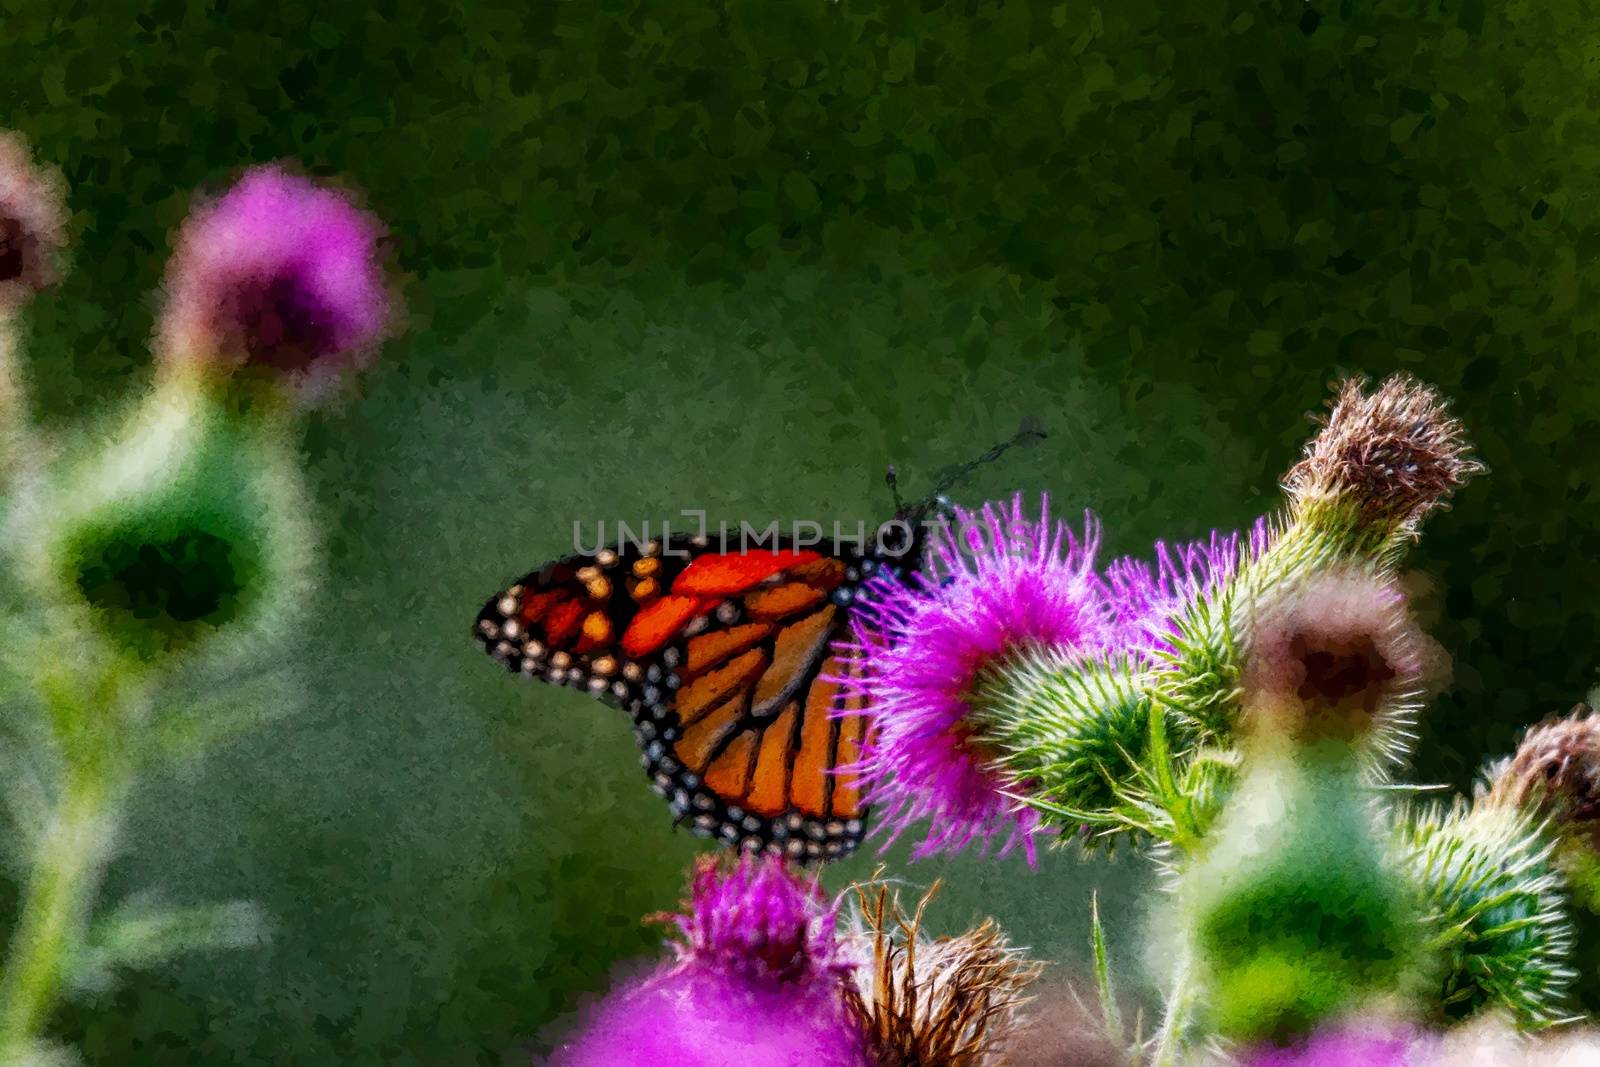 DIGITAL ARTWORK: Monarch on Thistle. A beautiful monarch butterfly pollinating a thistle by mynewturtle1